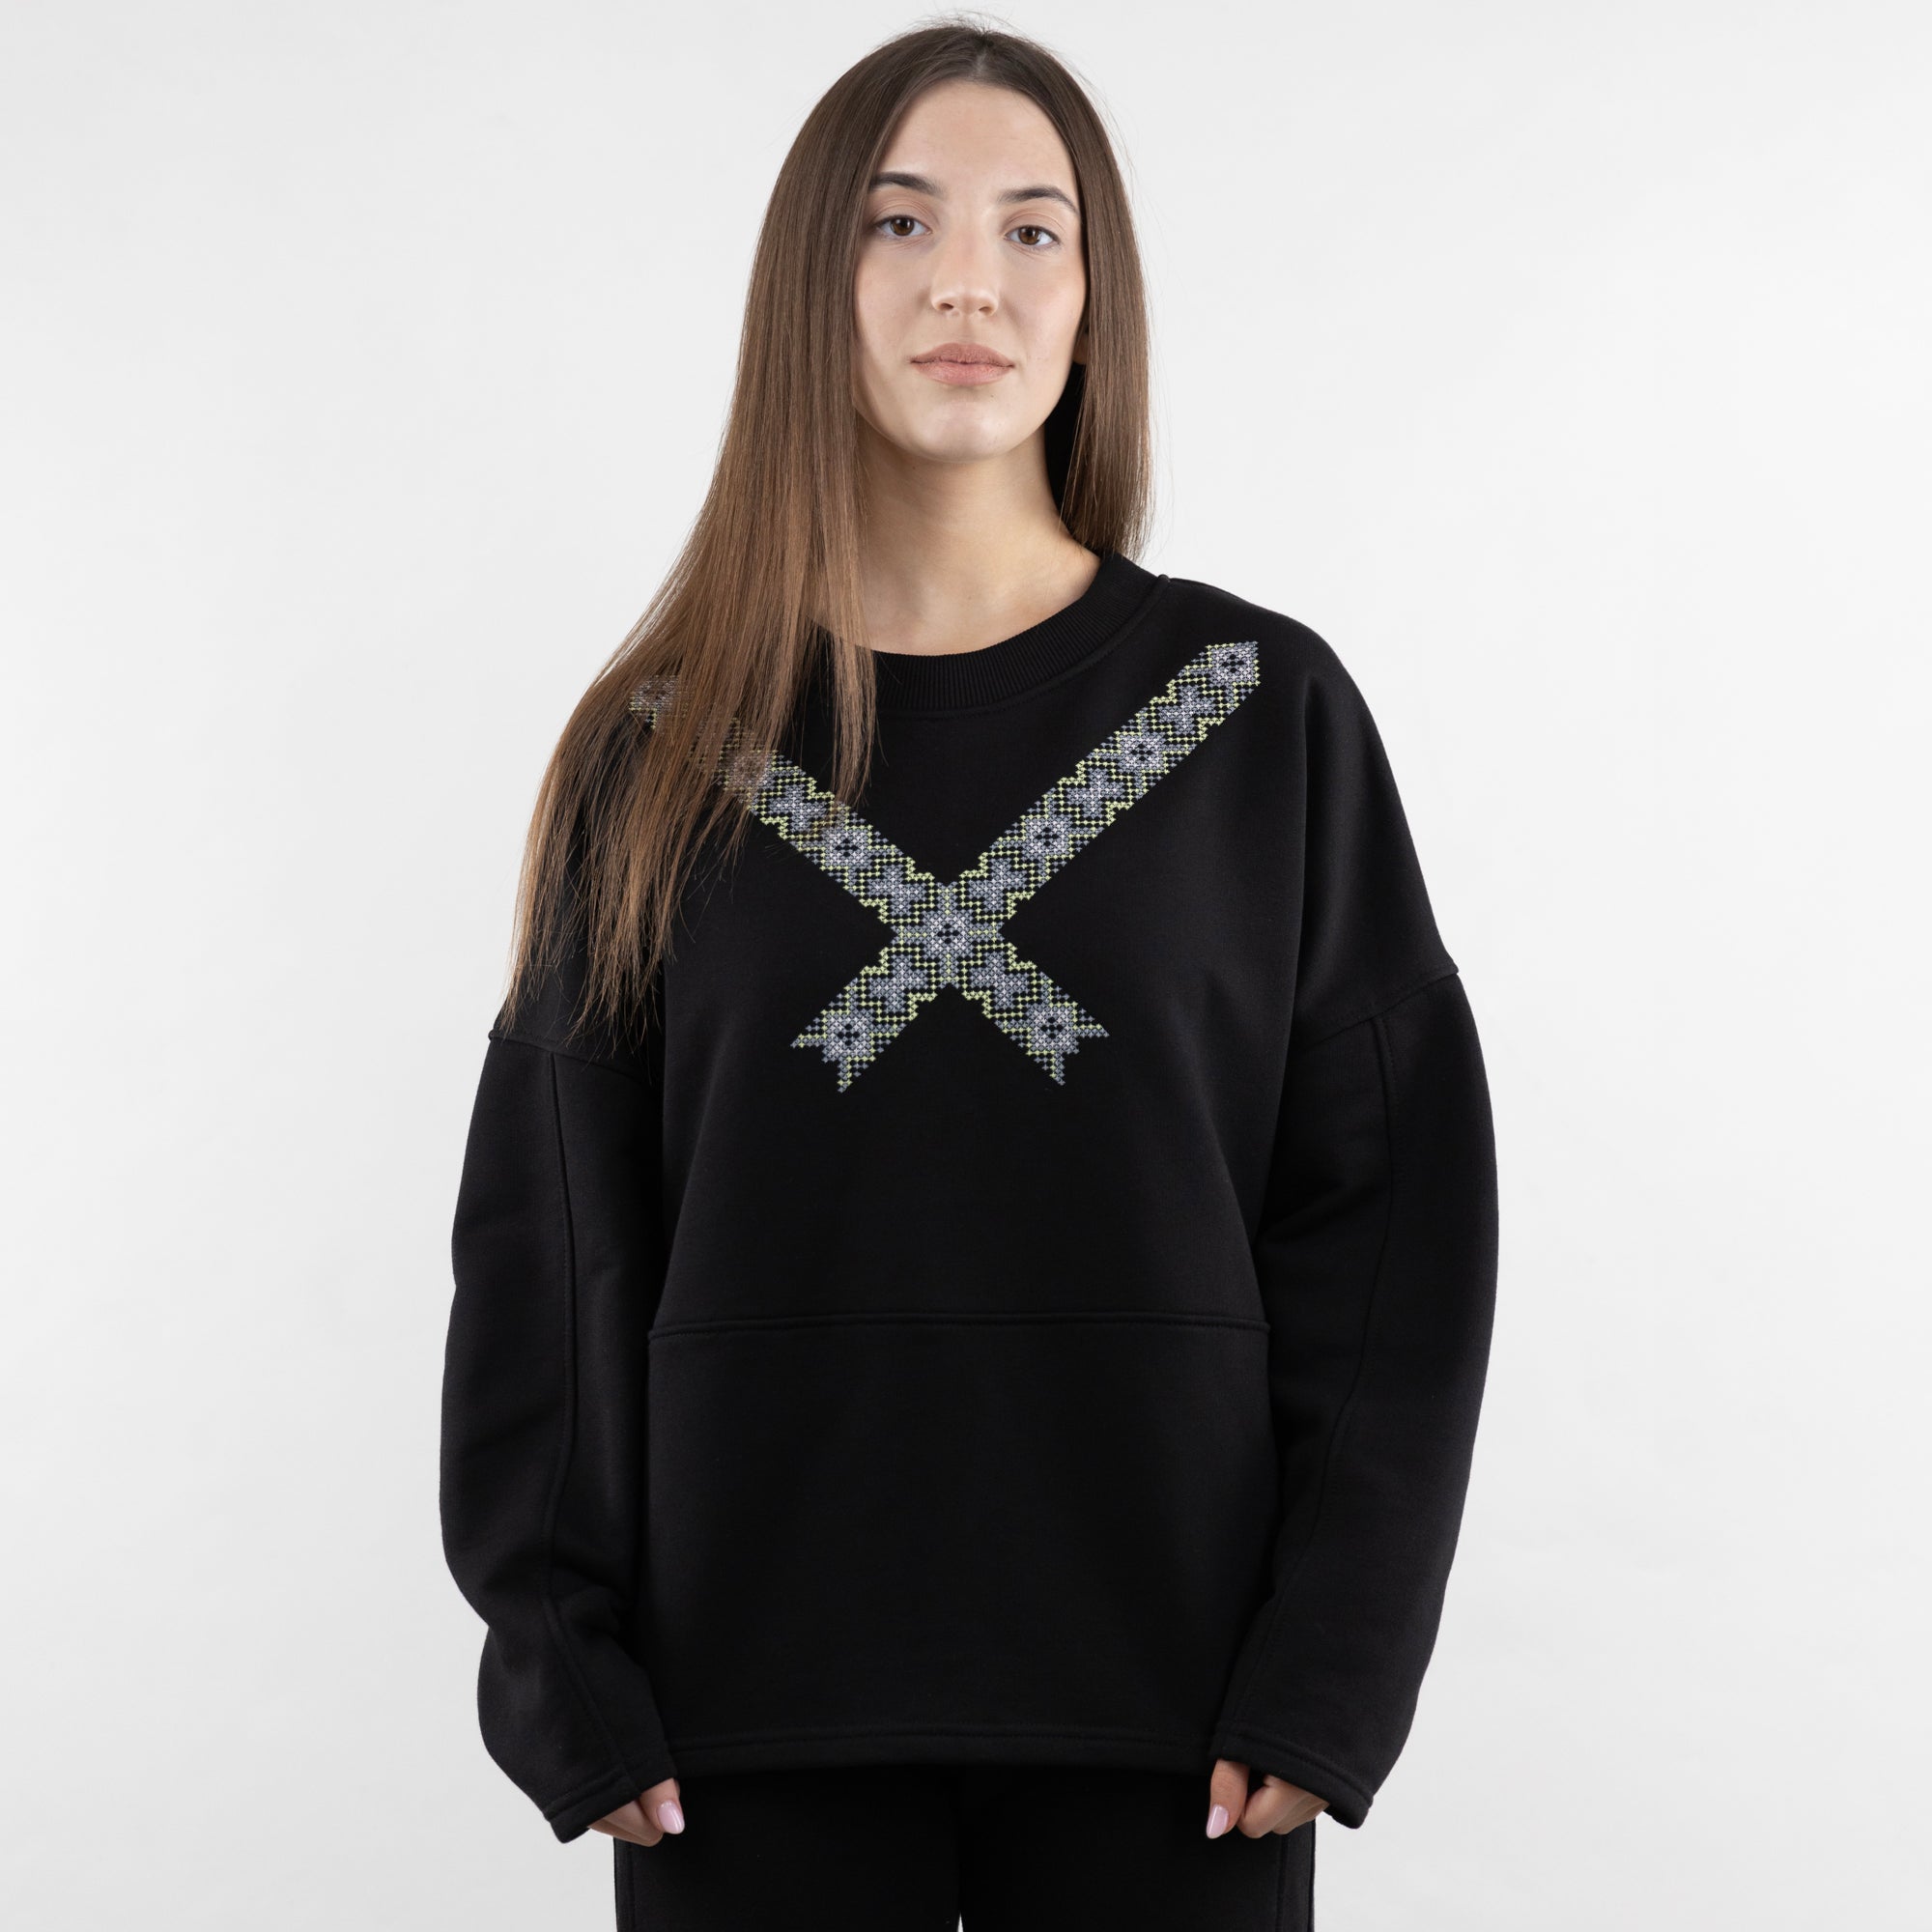 Sweatshirt "Dream" With Embroidery For Women